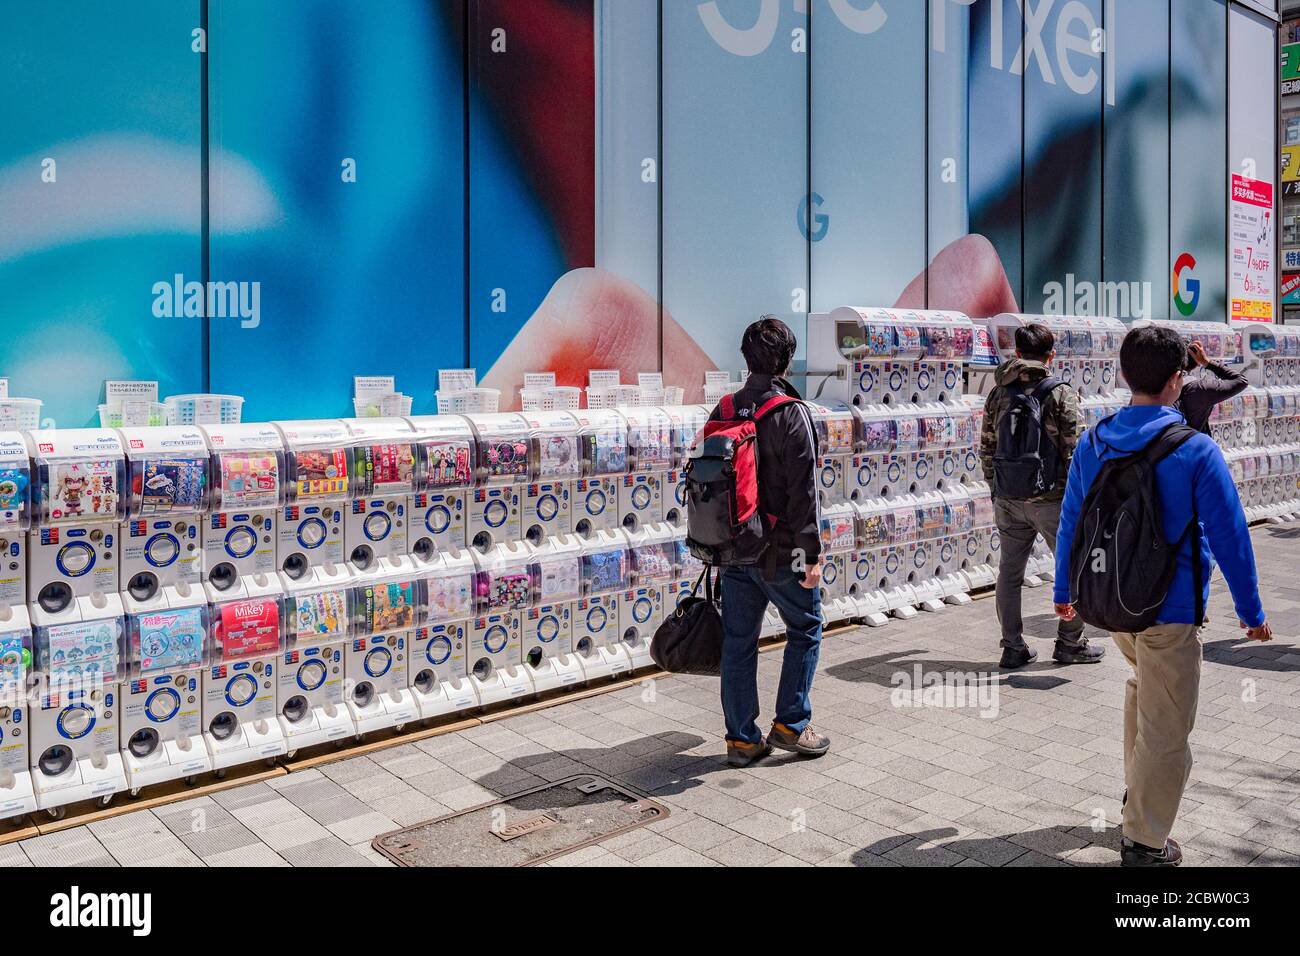 9 April 2019: Tokyo, Japan - Capsule stations, vending machines dispensing manga and anime related toys and collectibles outside a shop in the Akihaba Stock Photo